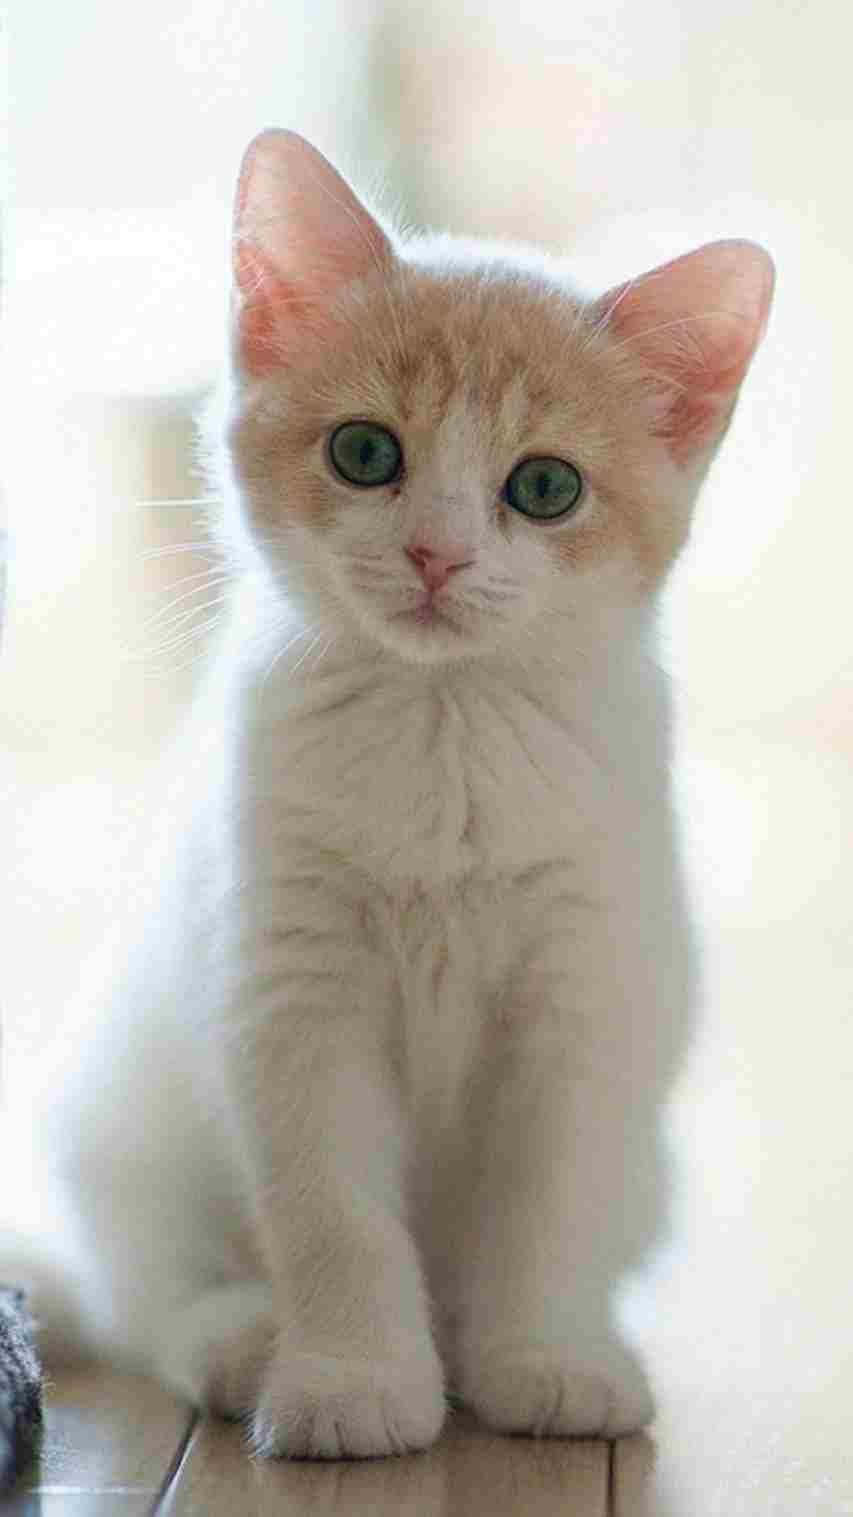 Cute CatWallpapers